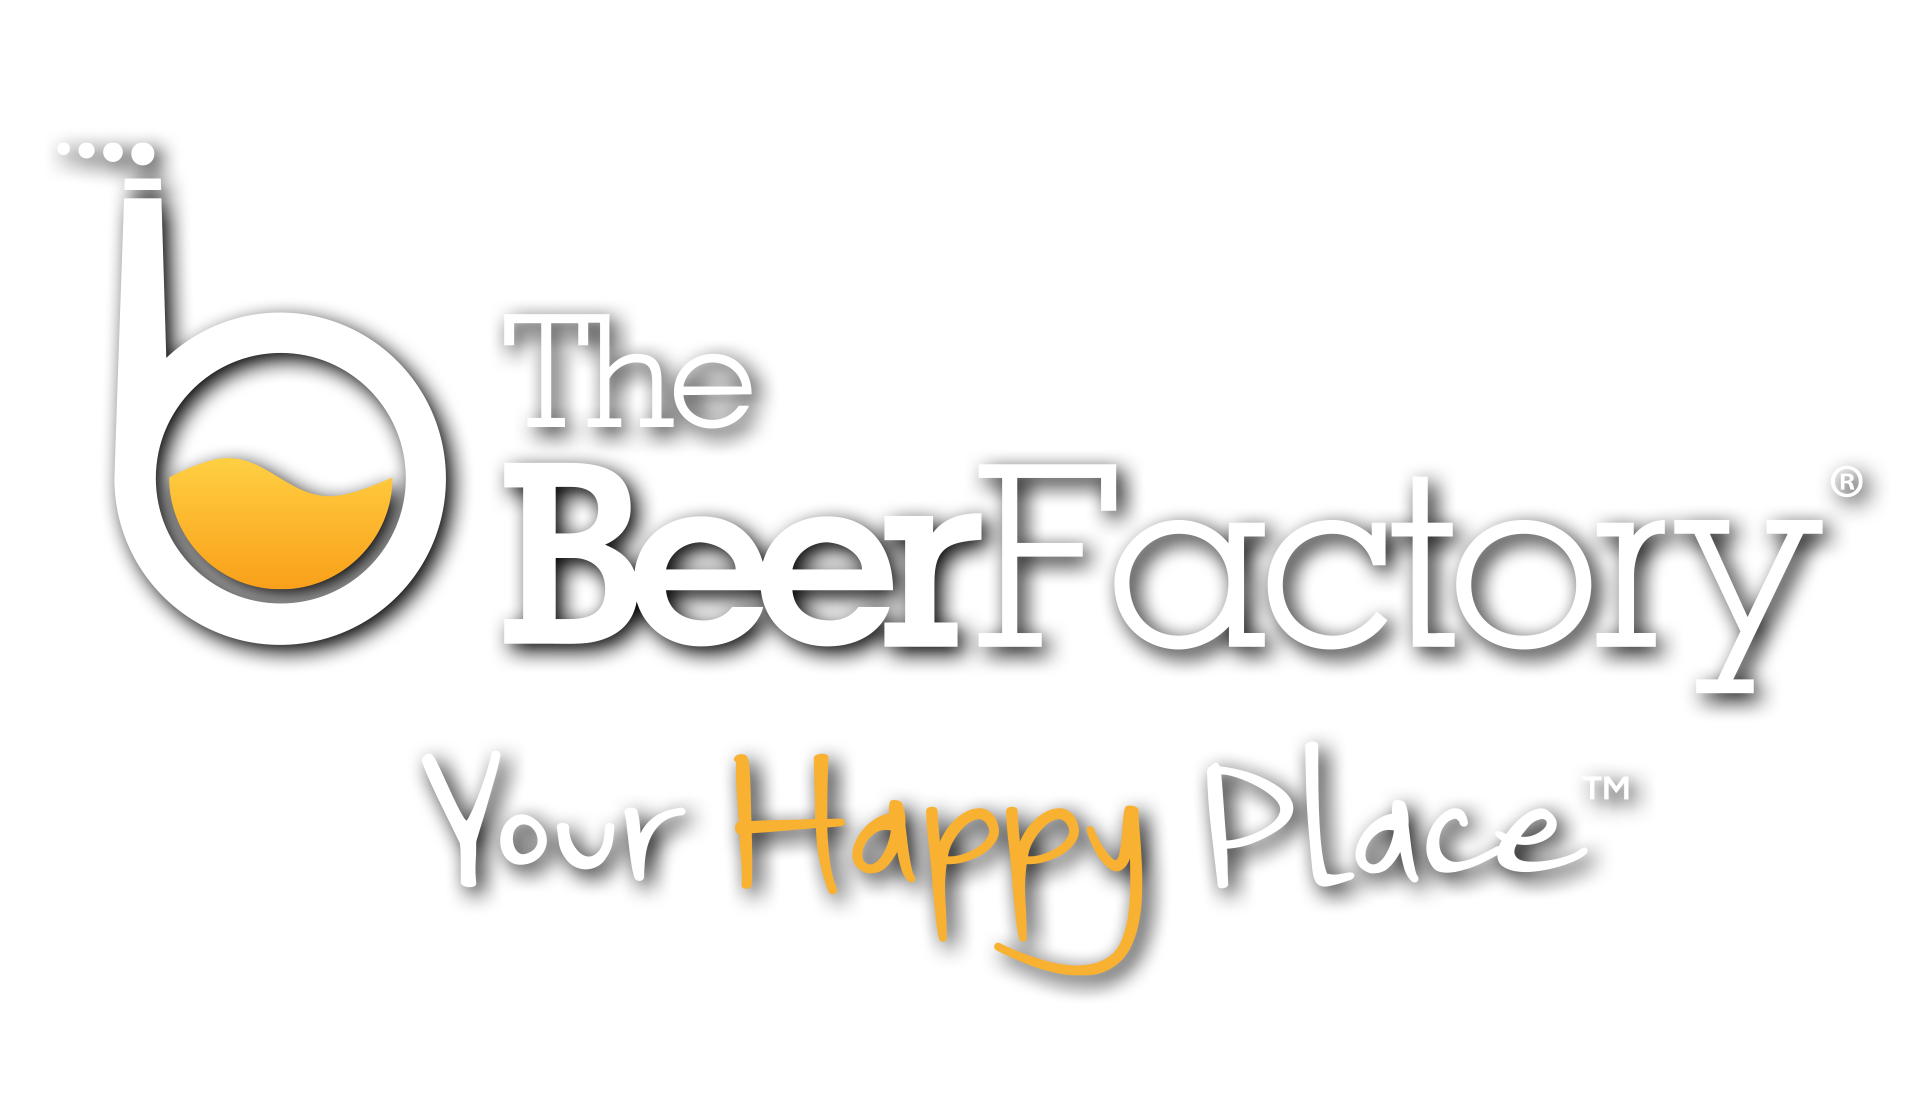 The Beer Factory Philippines